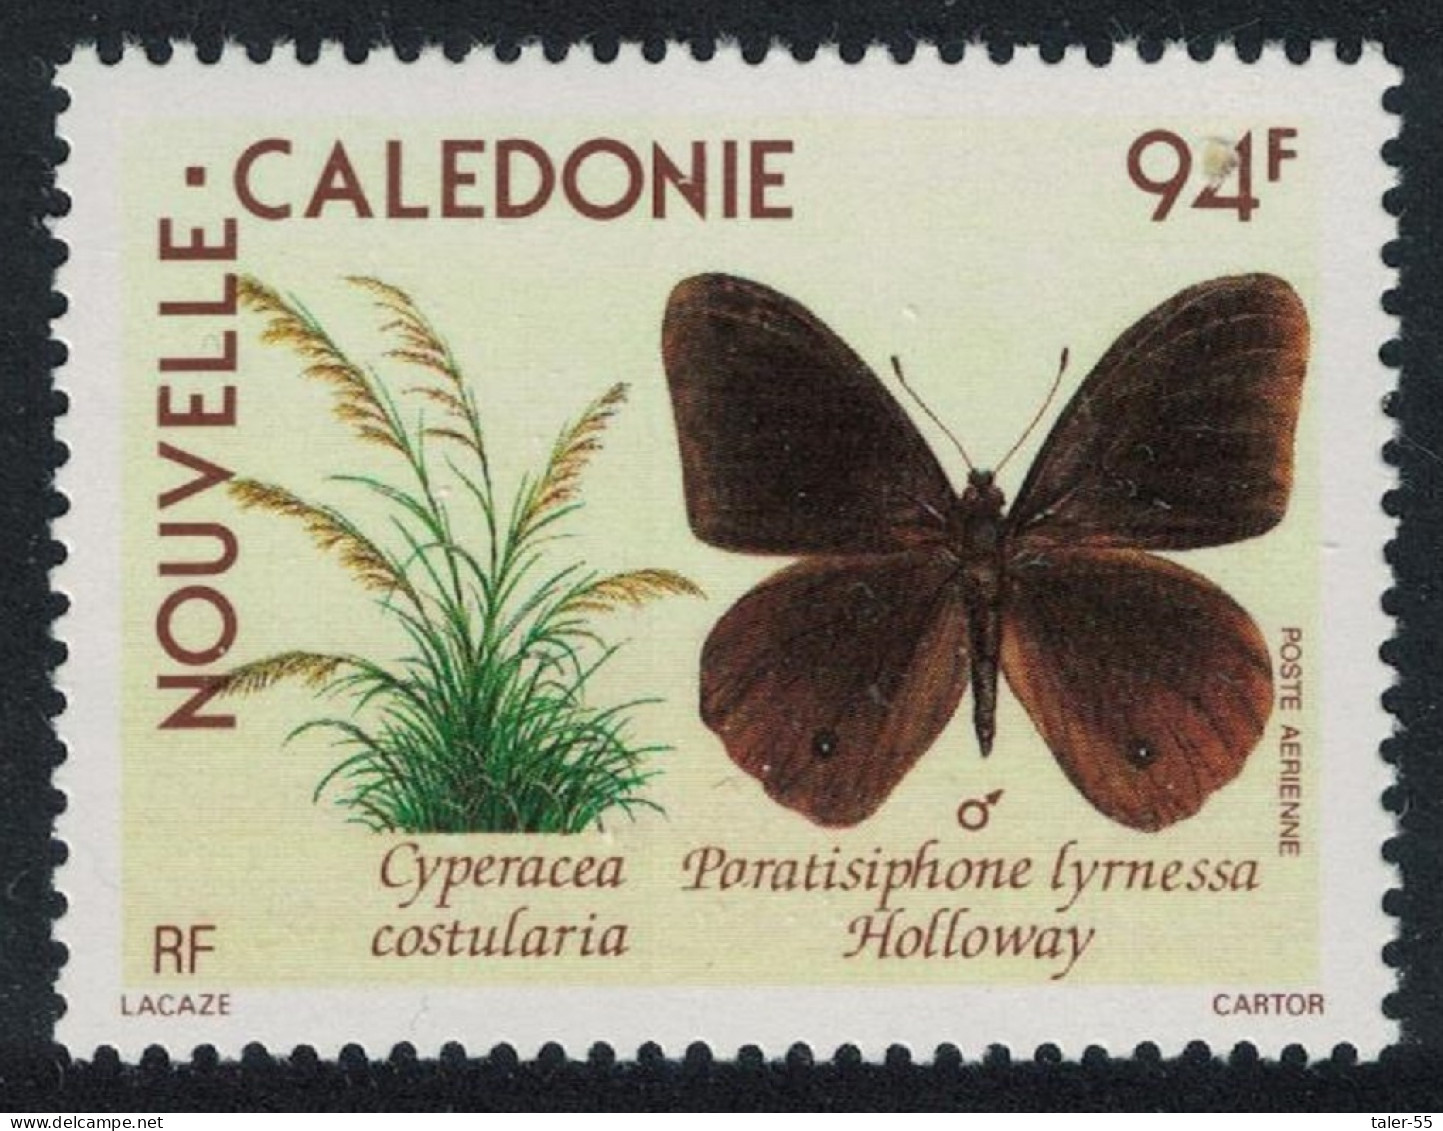 New Caledonia 'Paratisiphone Lyrnessa' Male Butterfly 1990 MNH SG#876 - Unused Stamps